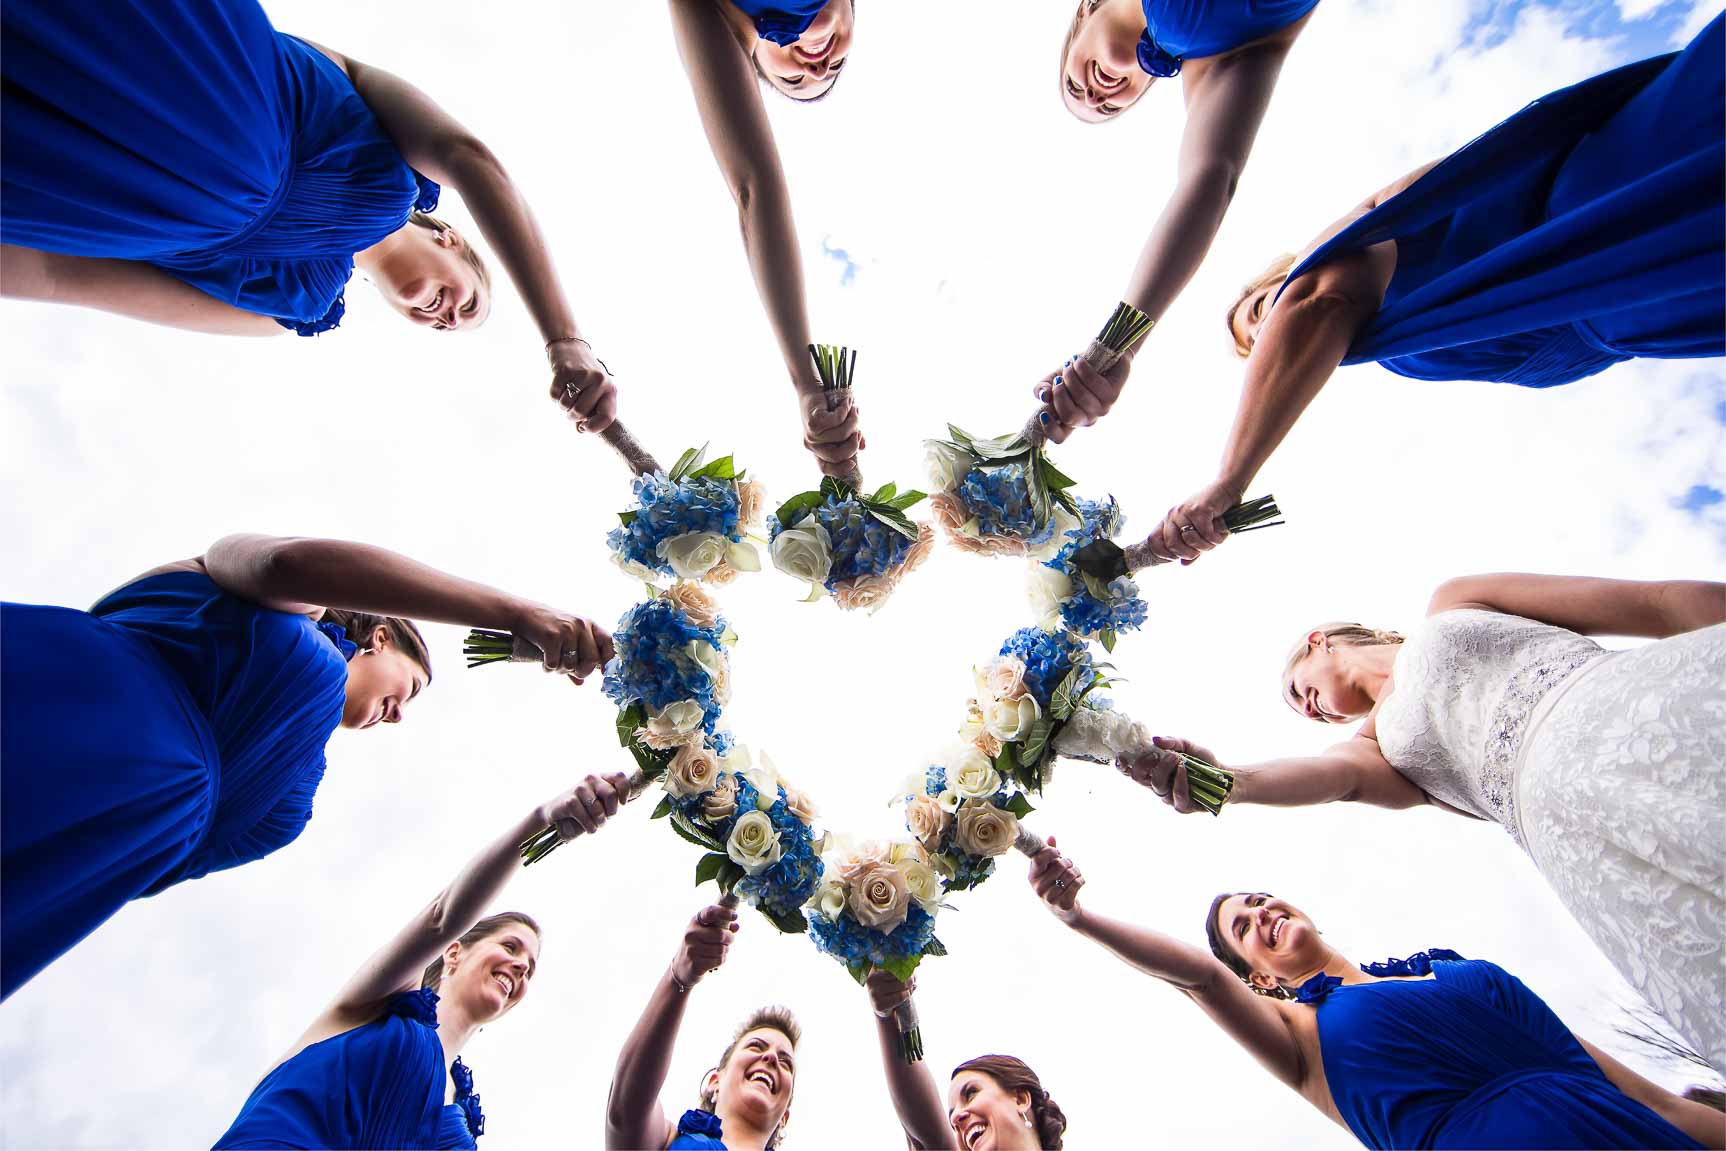 Creative PA Wedding Photographer, Lisa Rhinehart, captures this creative, fun image of the bride and her bridesmaids holding their bouquets in a heart shape 